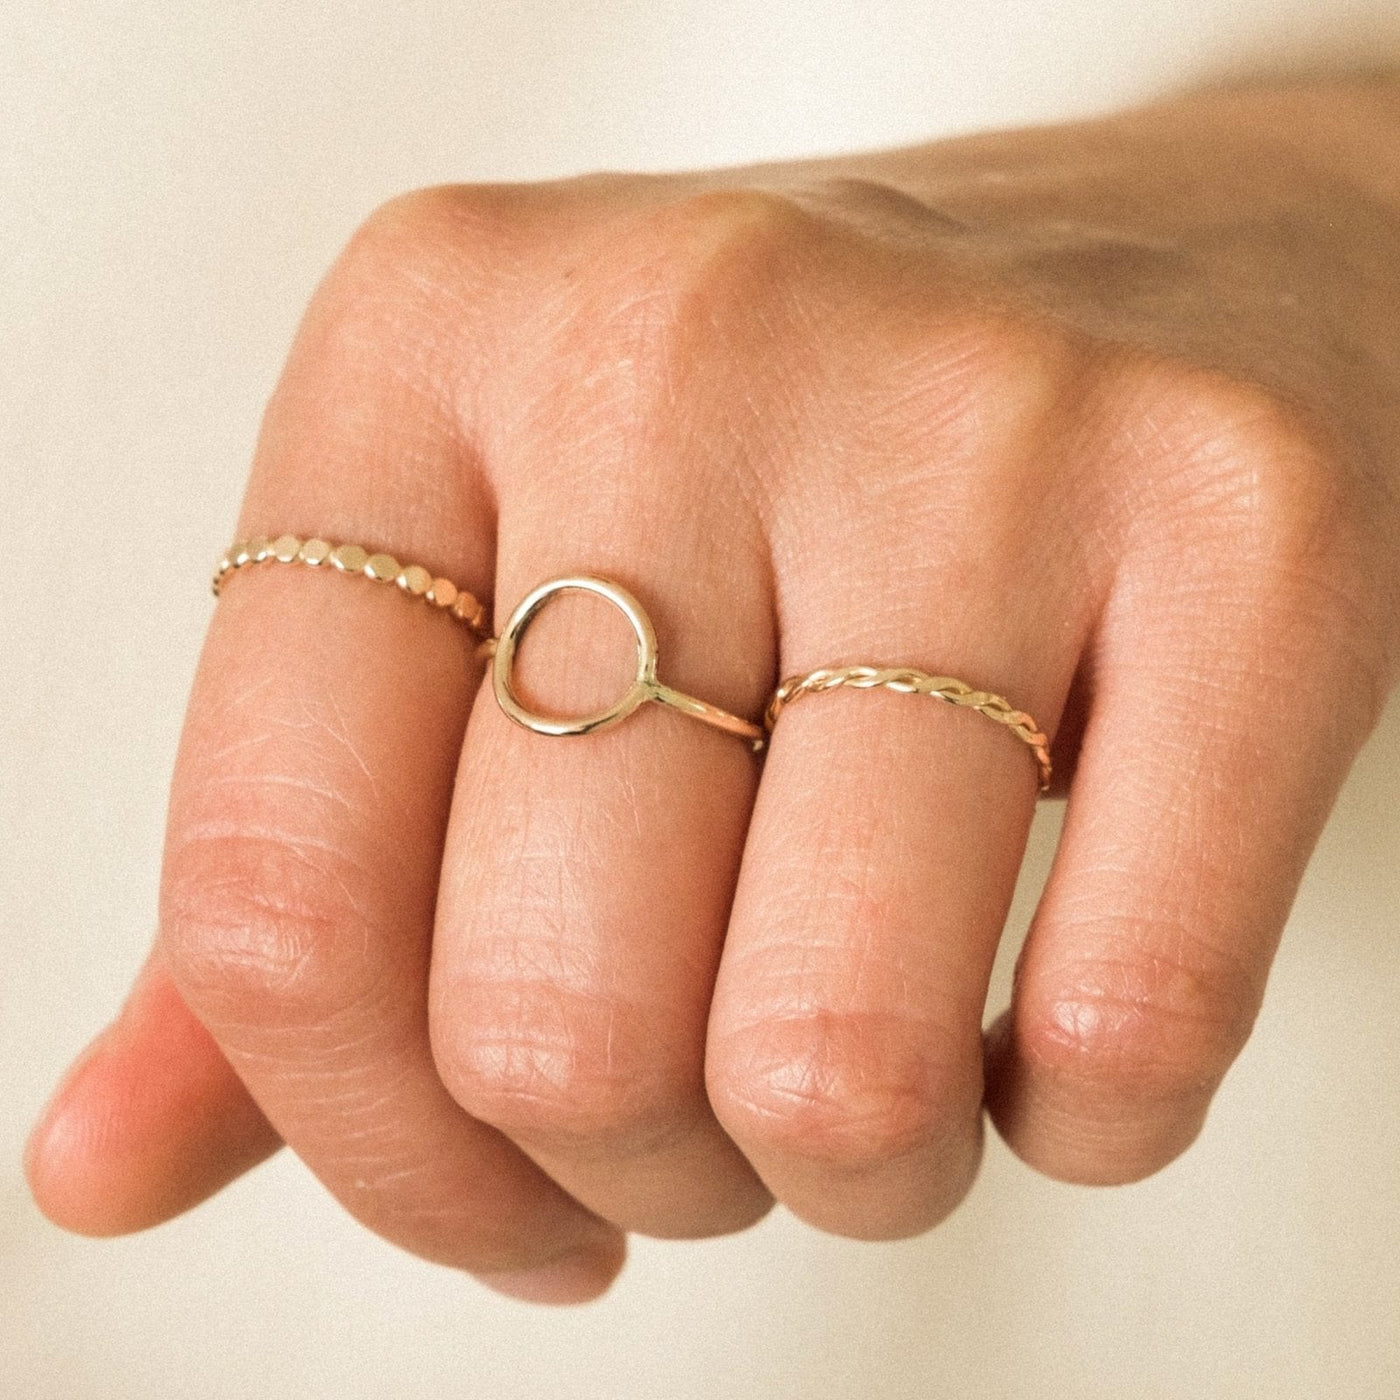 Karma Circle Ring by Simple & Dainty Jewelry